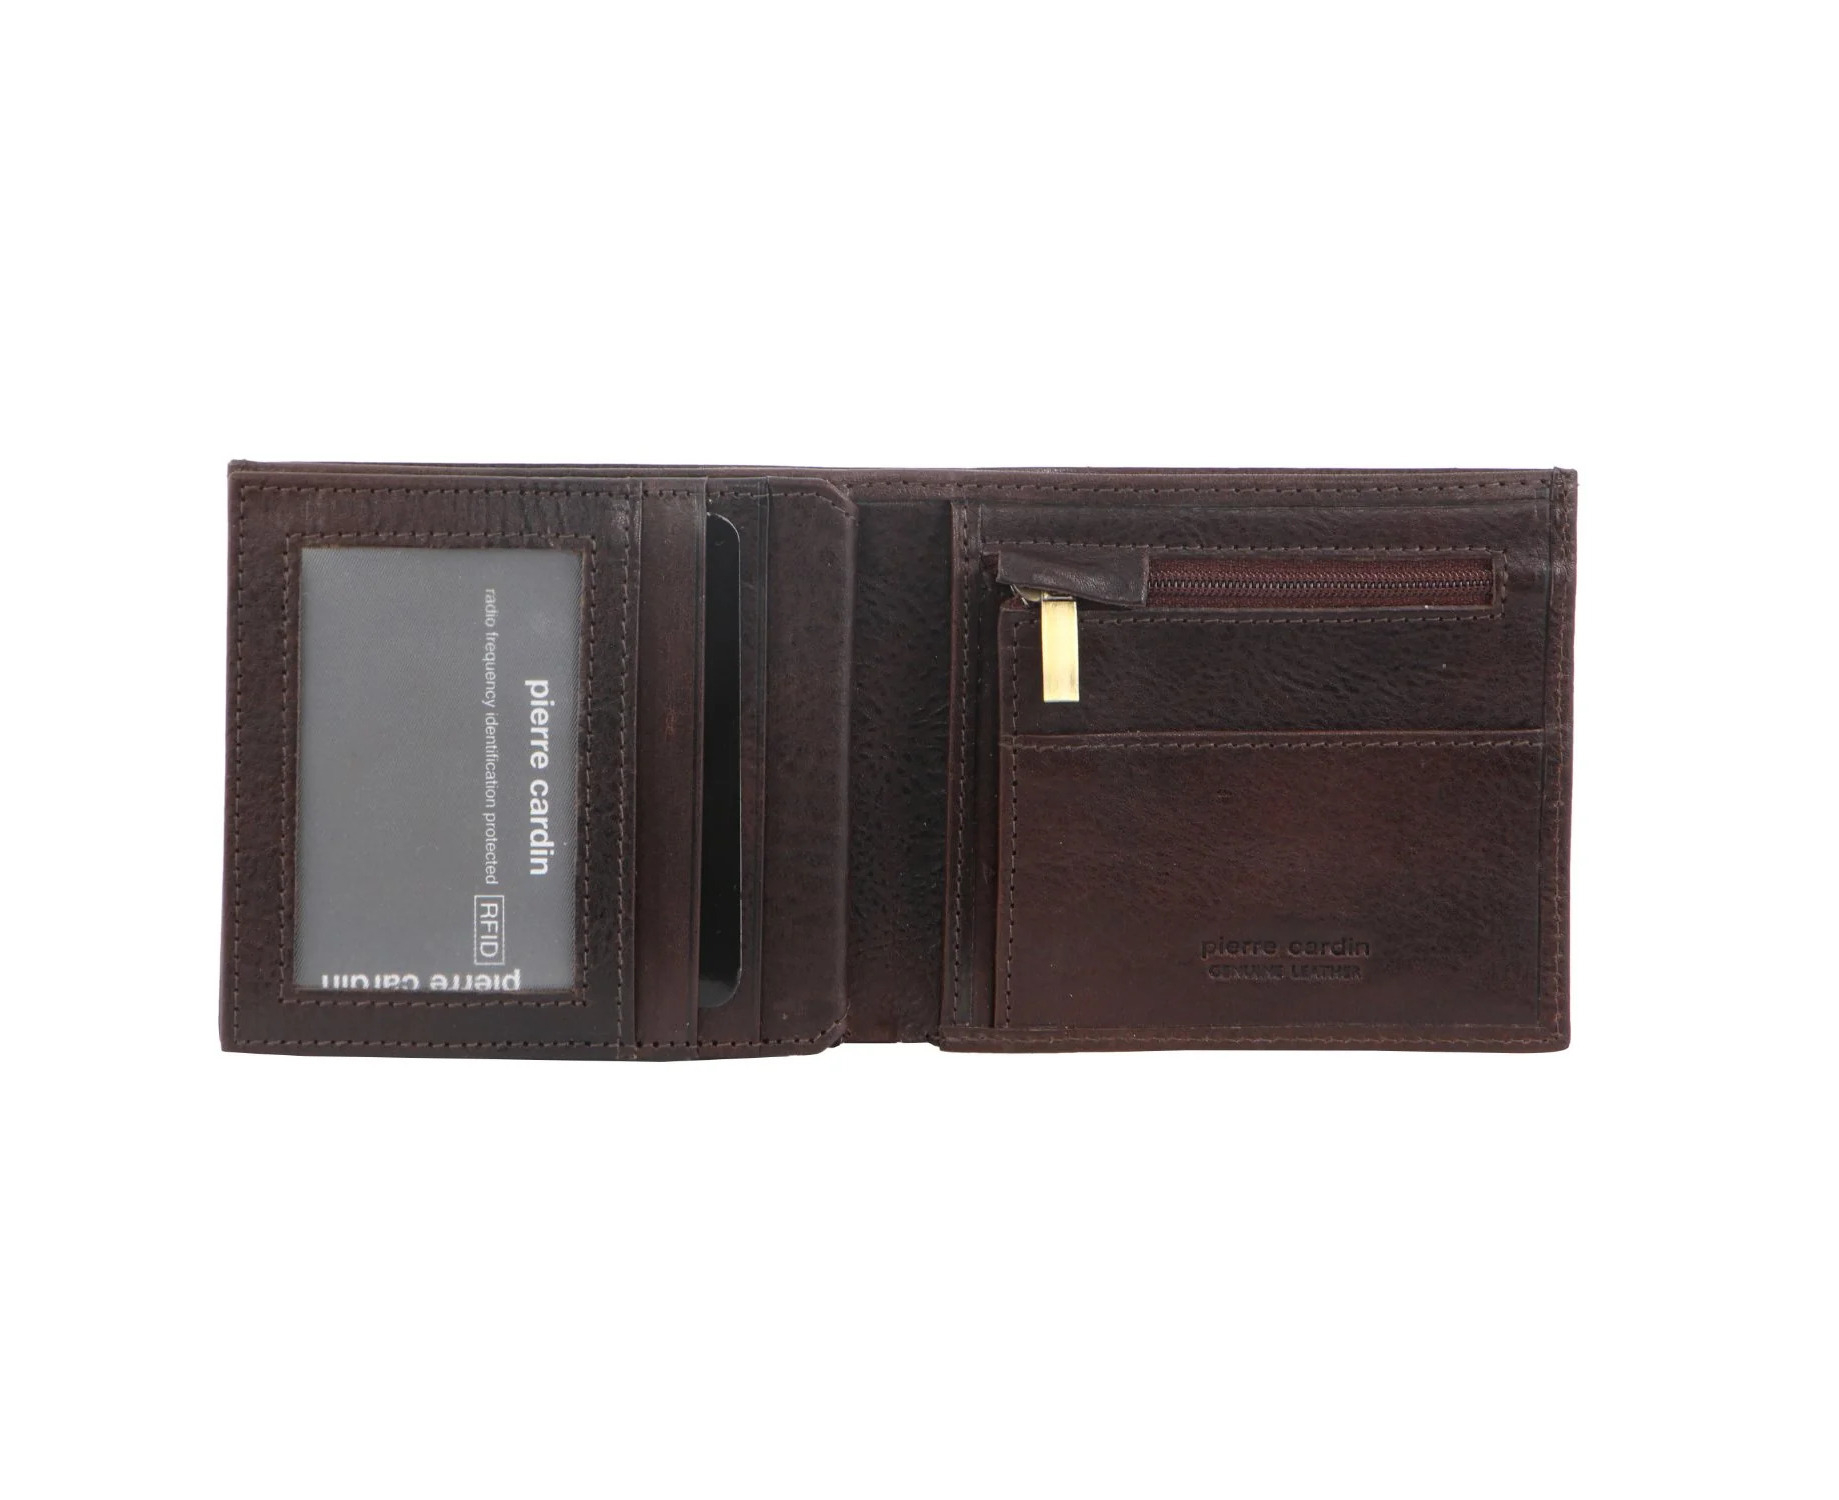 Pierre Cardin Mens Wallet Tri Fold Leather w/ RFID Protection ...